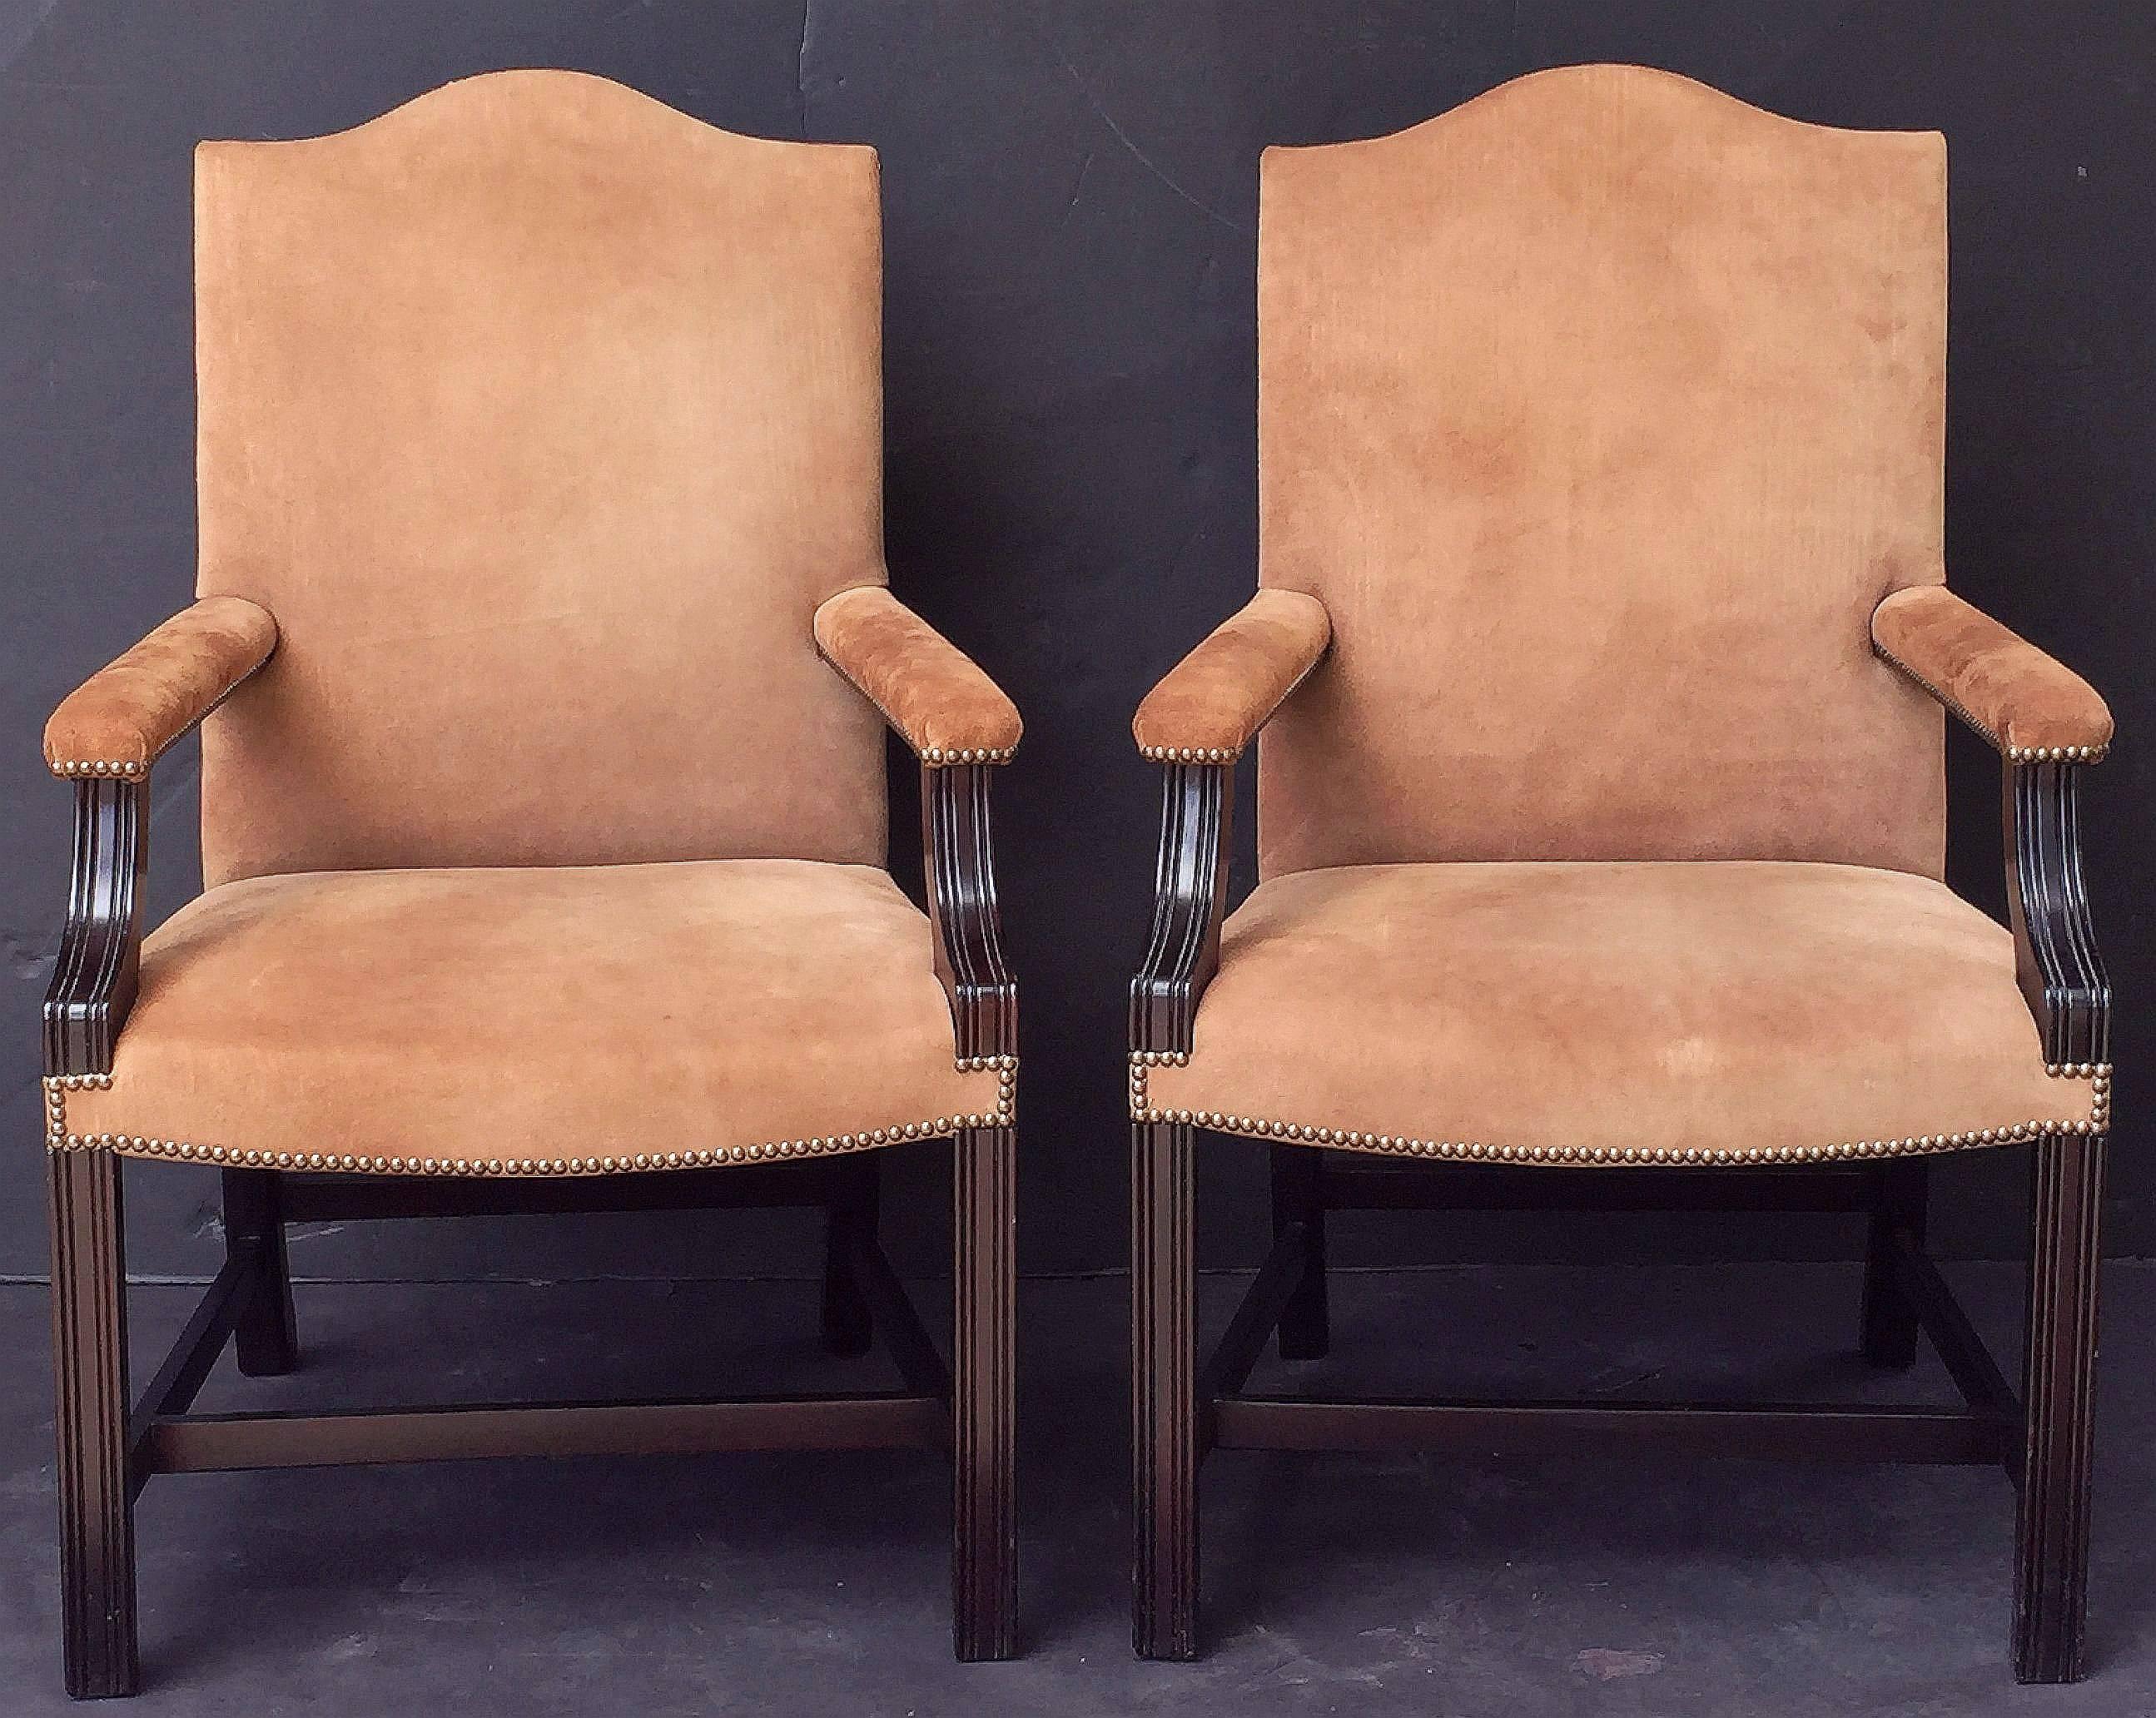 A fine pair of comfortable English library armchairs in the Georgian Gainsborough style, made by George Smith, 20th century, and featuring stylish arms.
Having handsome suede leather covers, stubs, backs, and seats with brass studded edges.
With